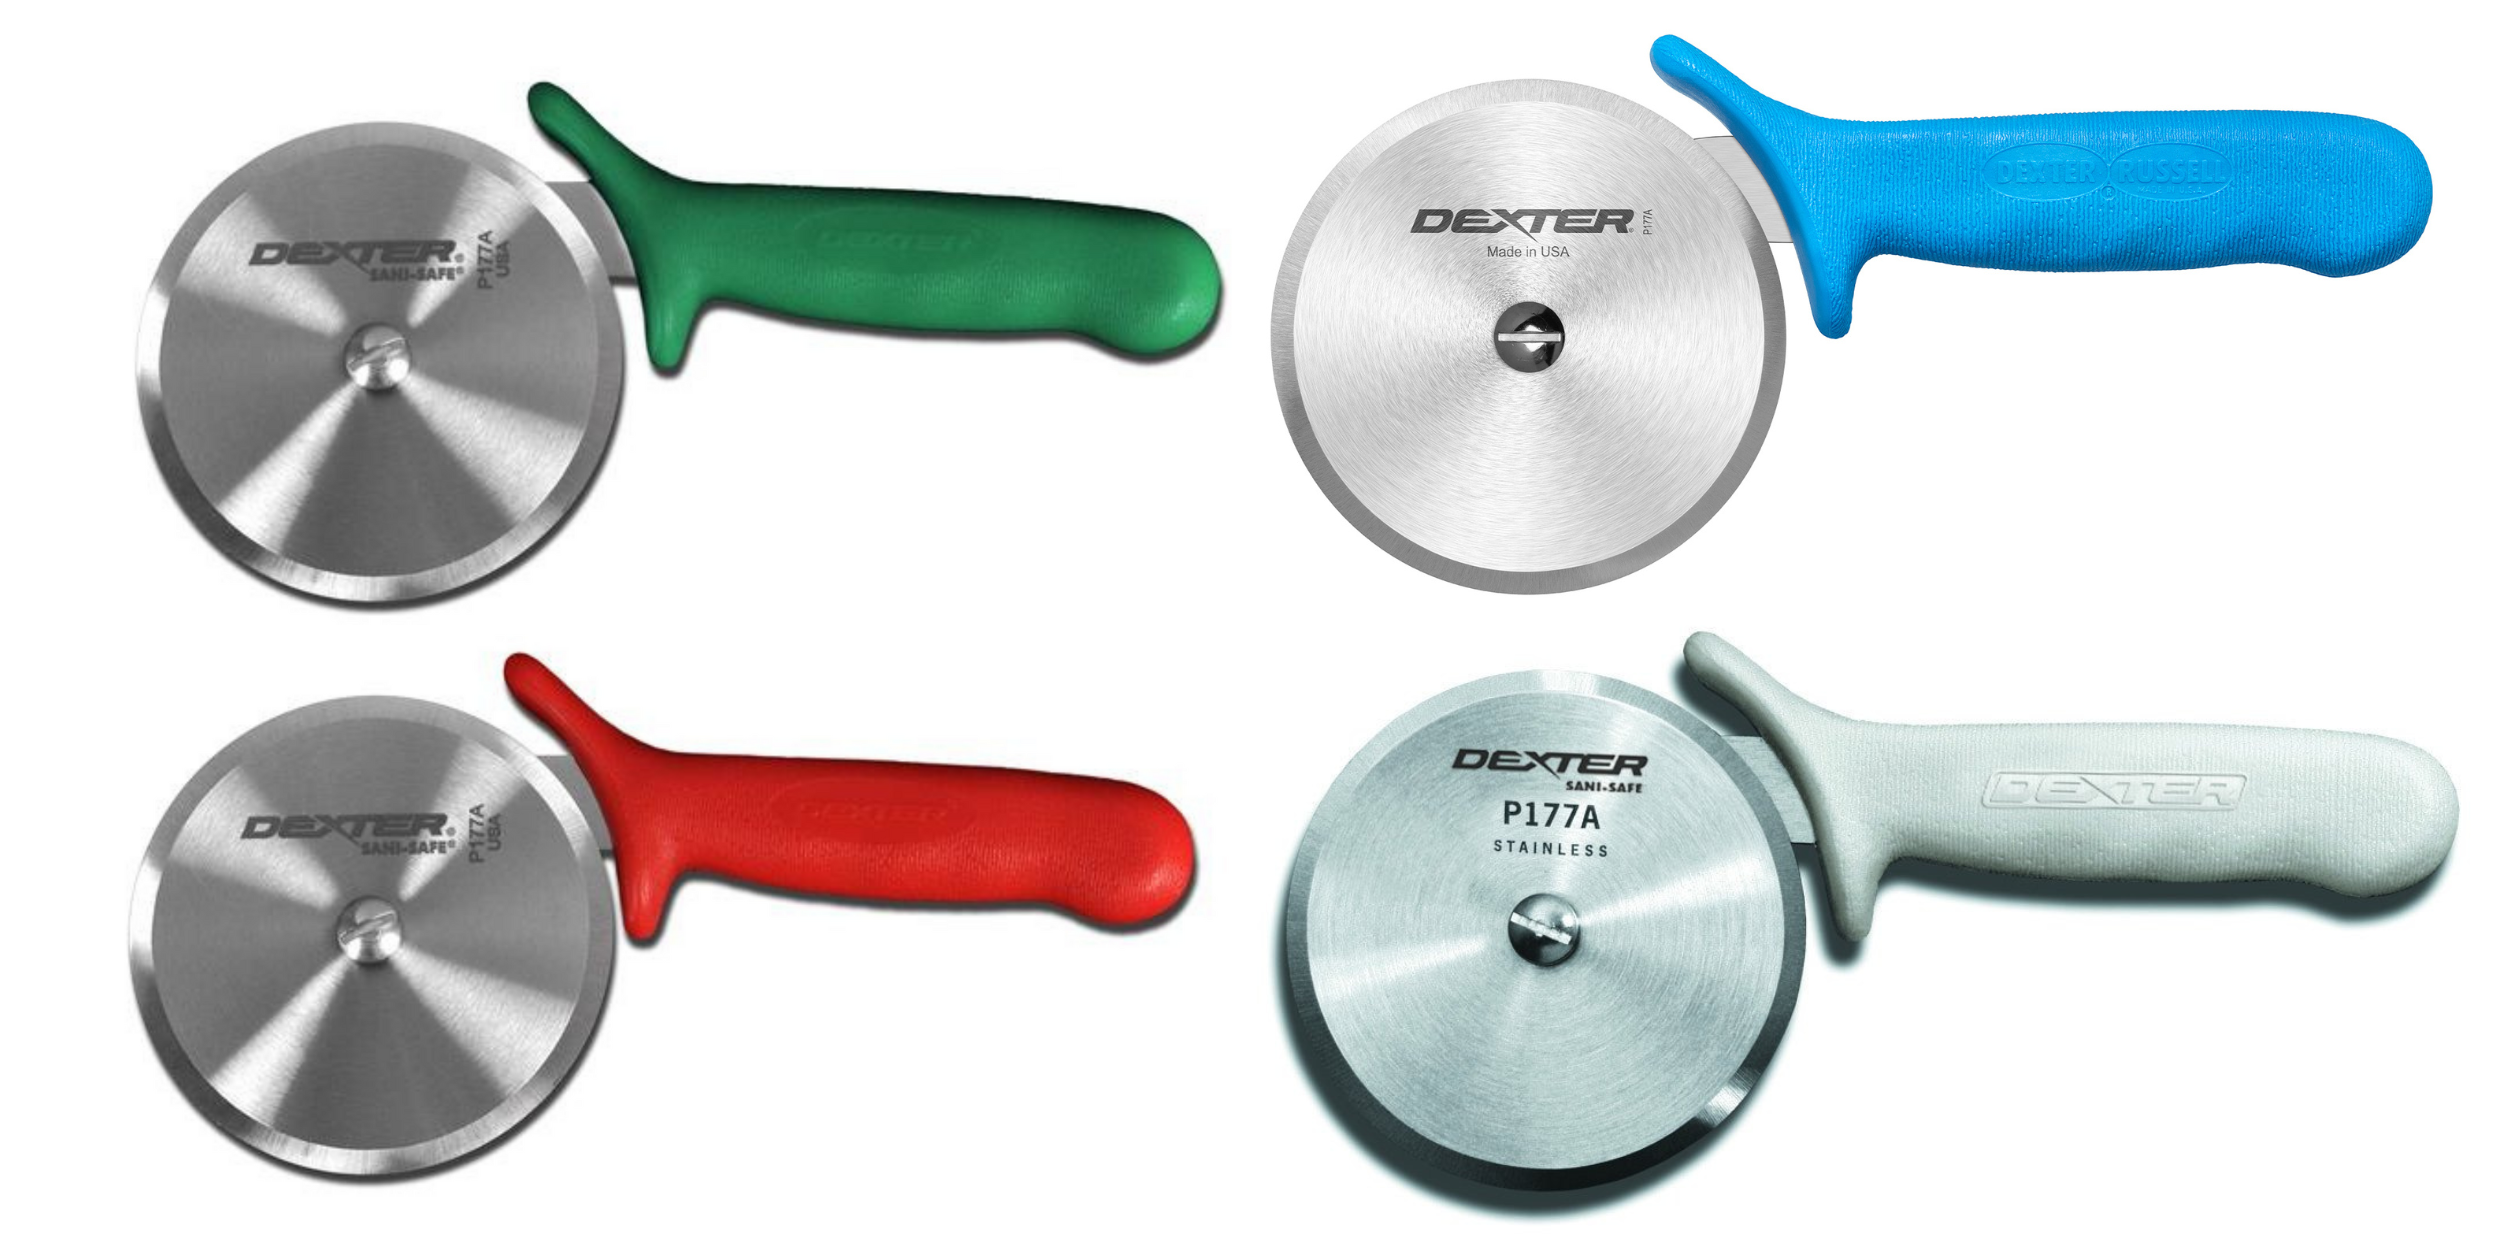 Dexter Pizza Cutters with different coloured handles